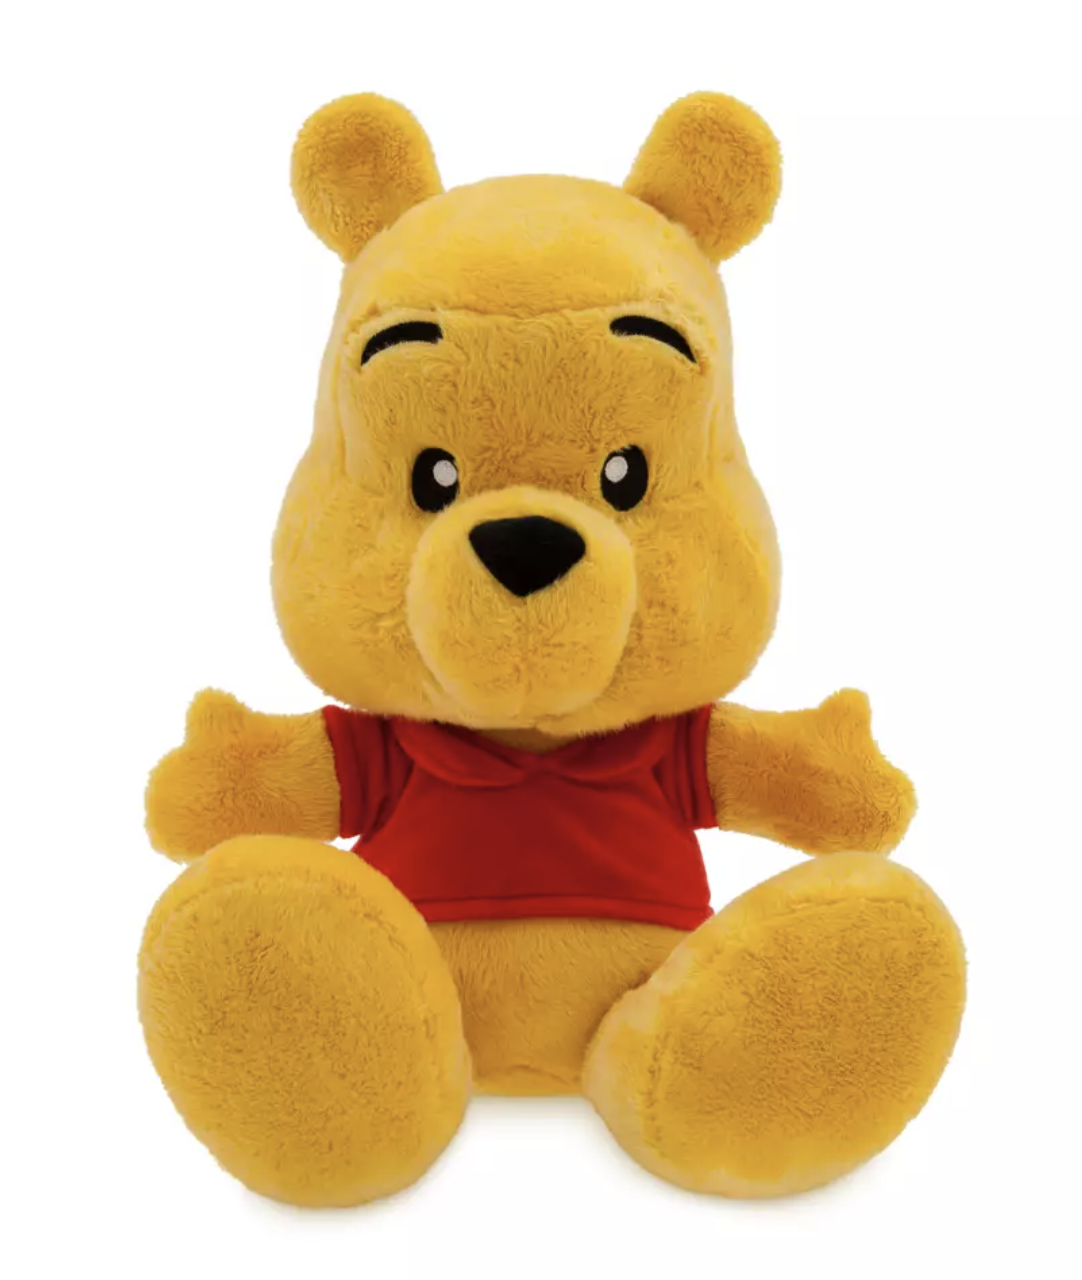 A Winnie the Pooh plush with large feet